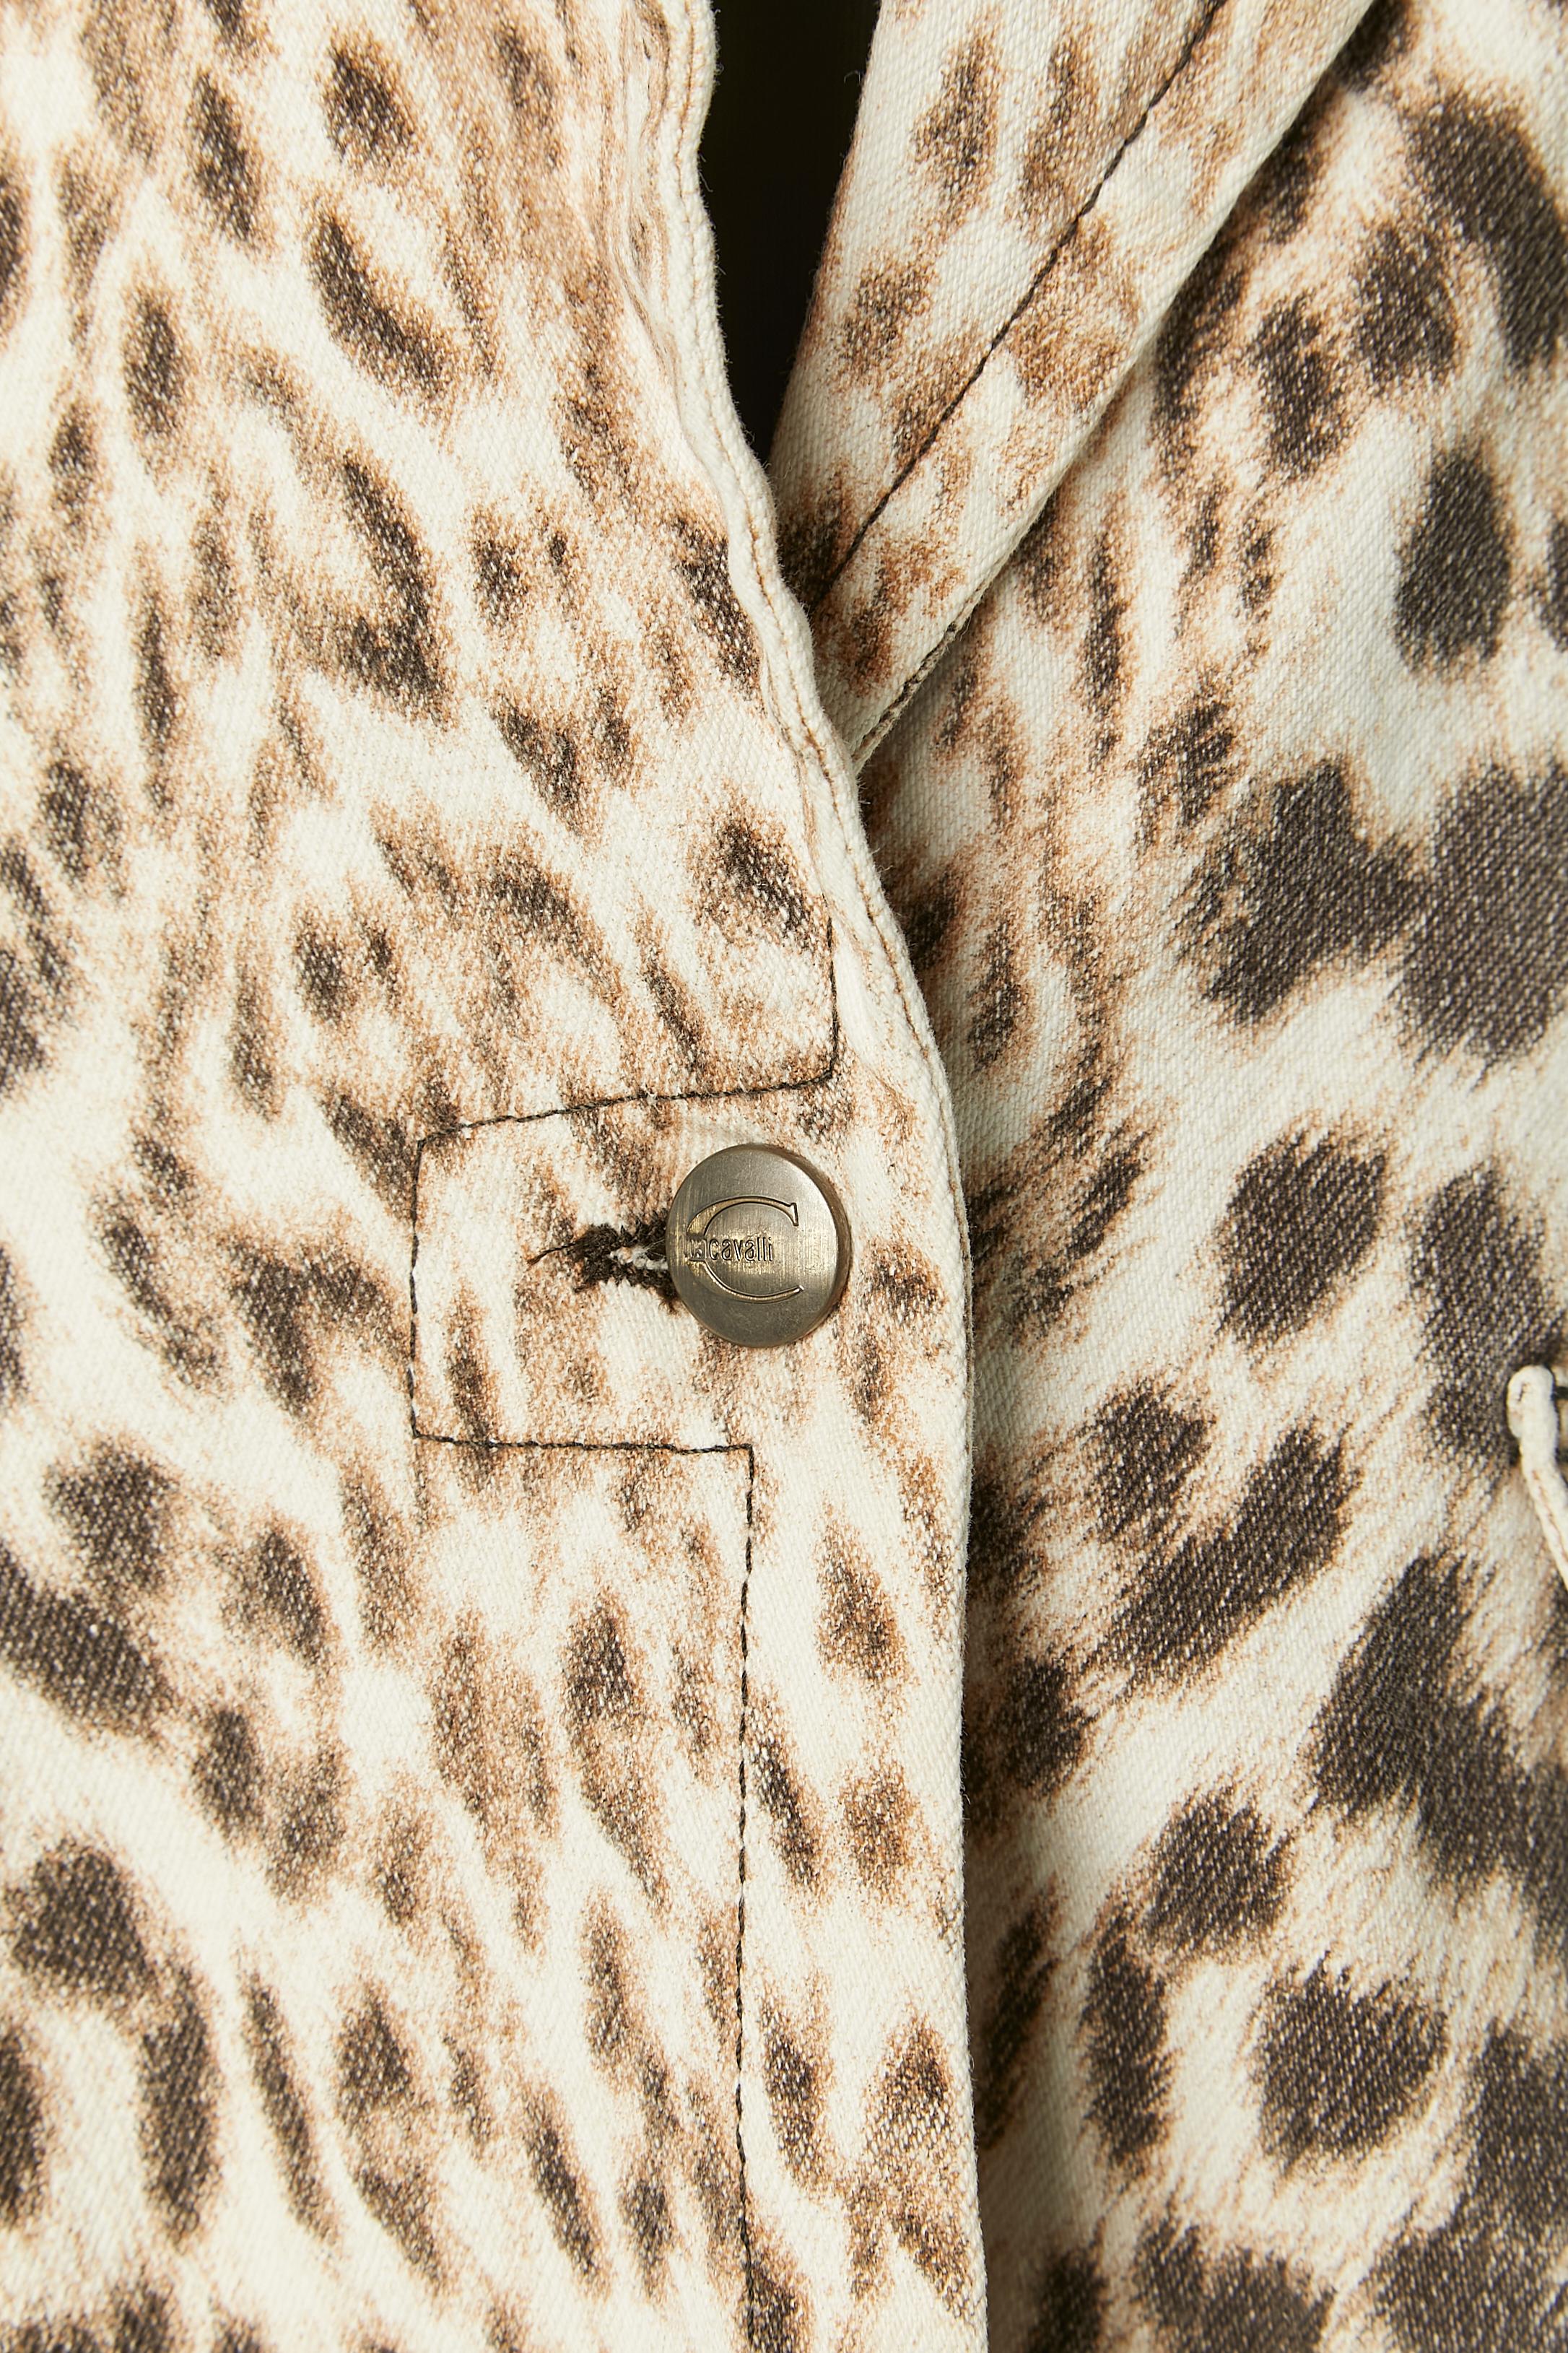 Leopard printed single-breasted cotton jacket.
Authenticity hologram. One branded button in the middle front and 3 on each cuffs. 
SIZE XS 